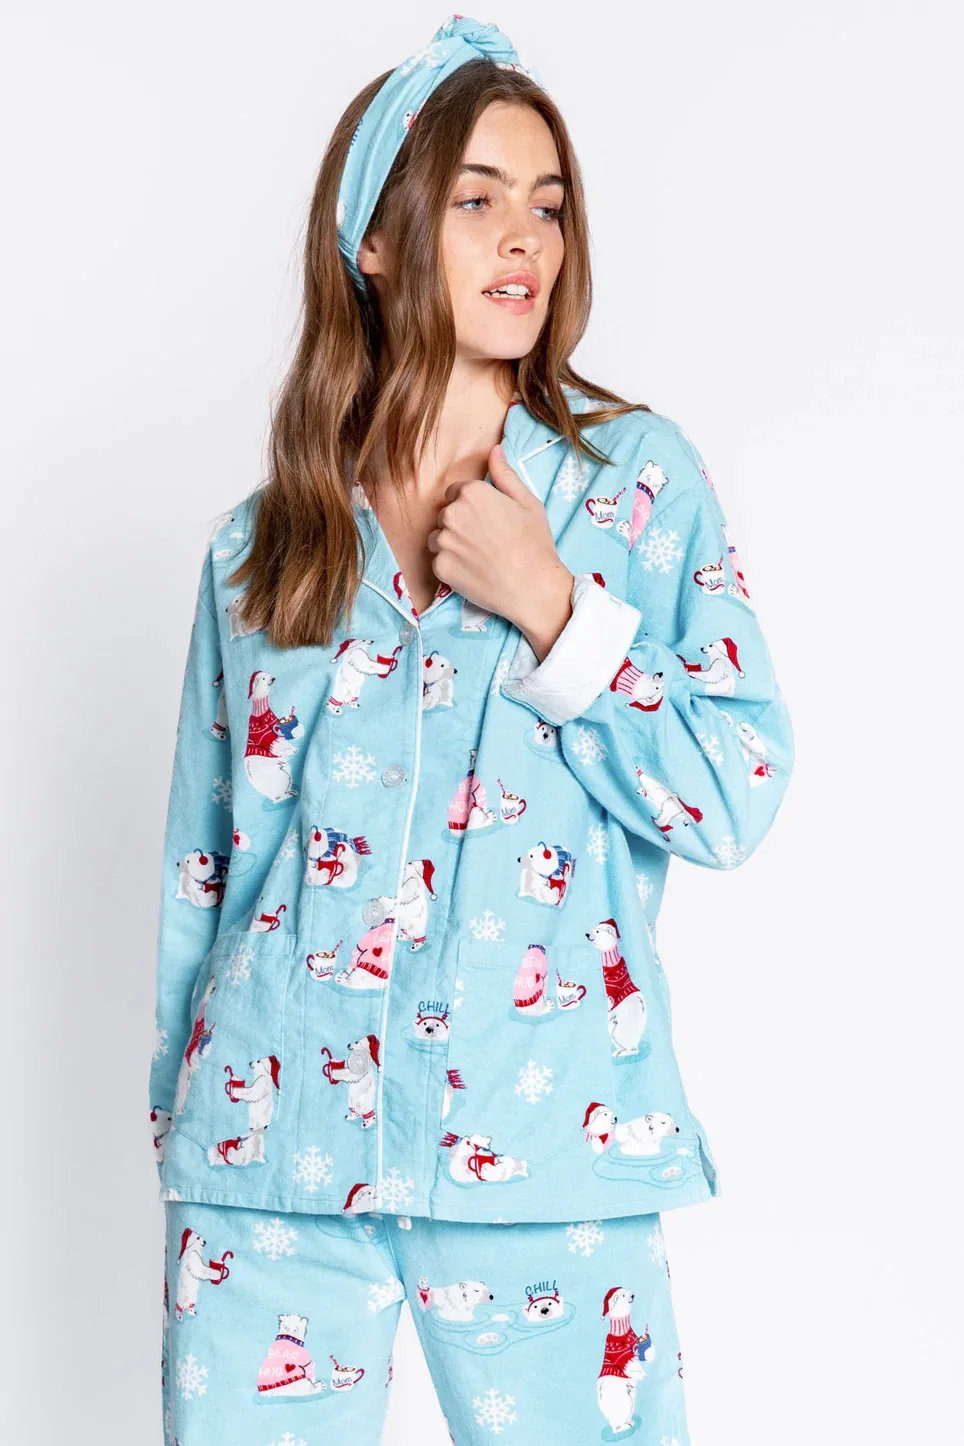 Room Wear Ladies Pajamas Women Home Sleepwear Long Sleeve Trousers Set Autumn and Winter Warm Thick Cotton spring autumn pajamas women pure cotton crepe cartoon calf long sleeve sleepwear set ladies thin summer loose comfy home wear